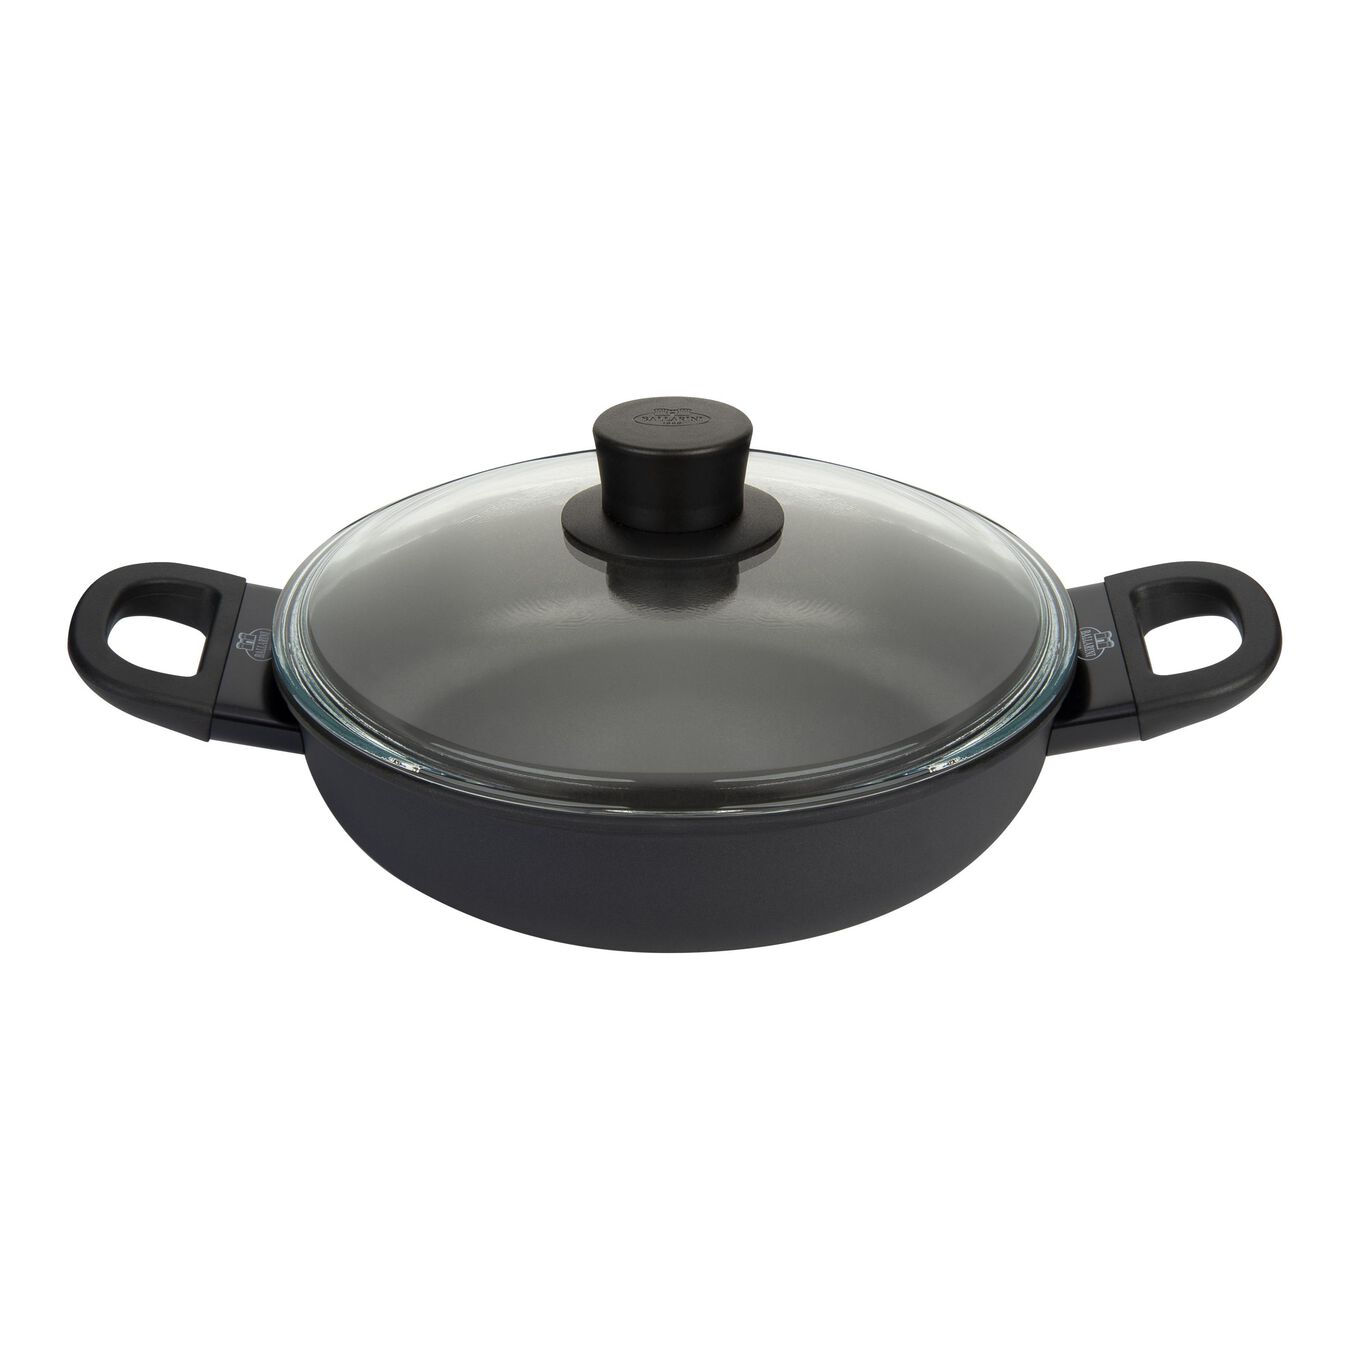  PTFE round Saucier and sauteuse with glass lid, black,,large 1